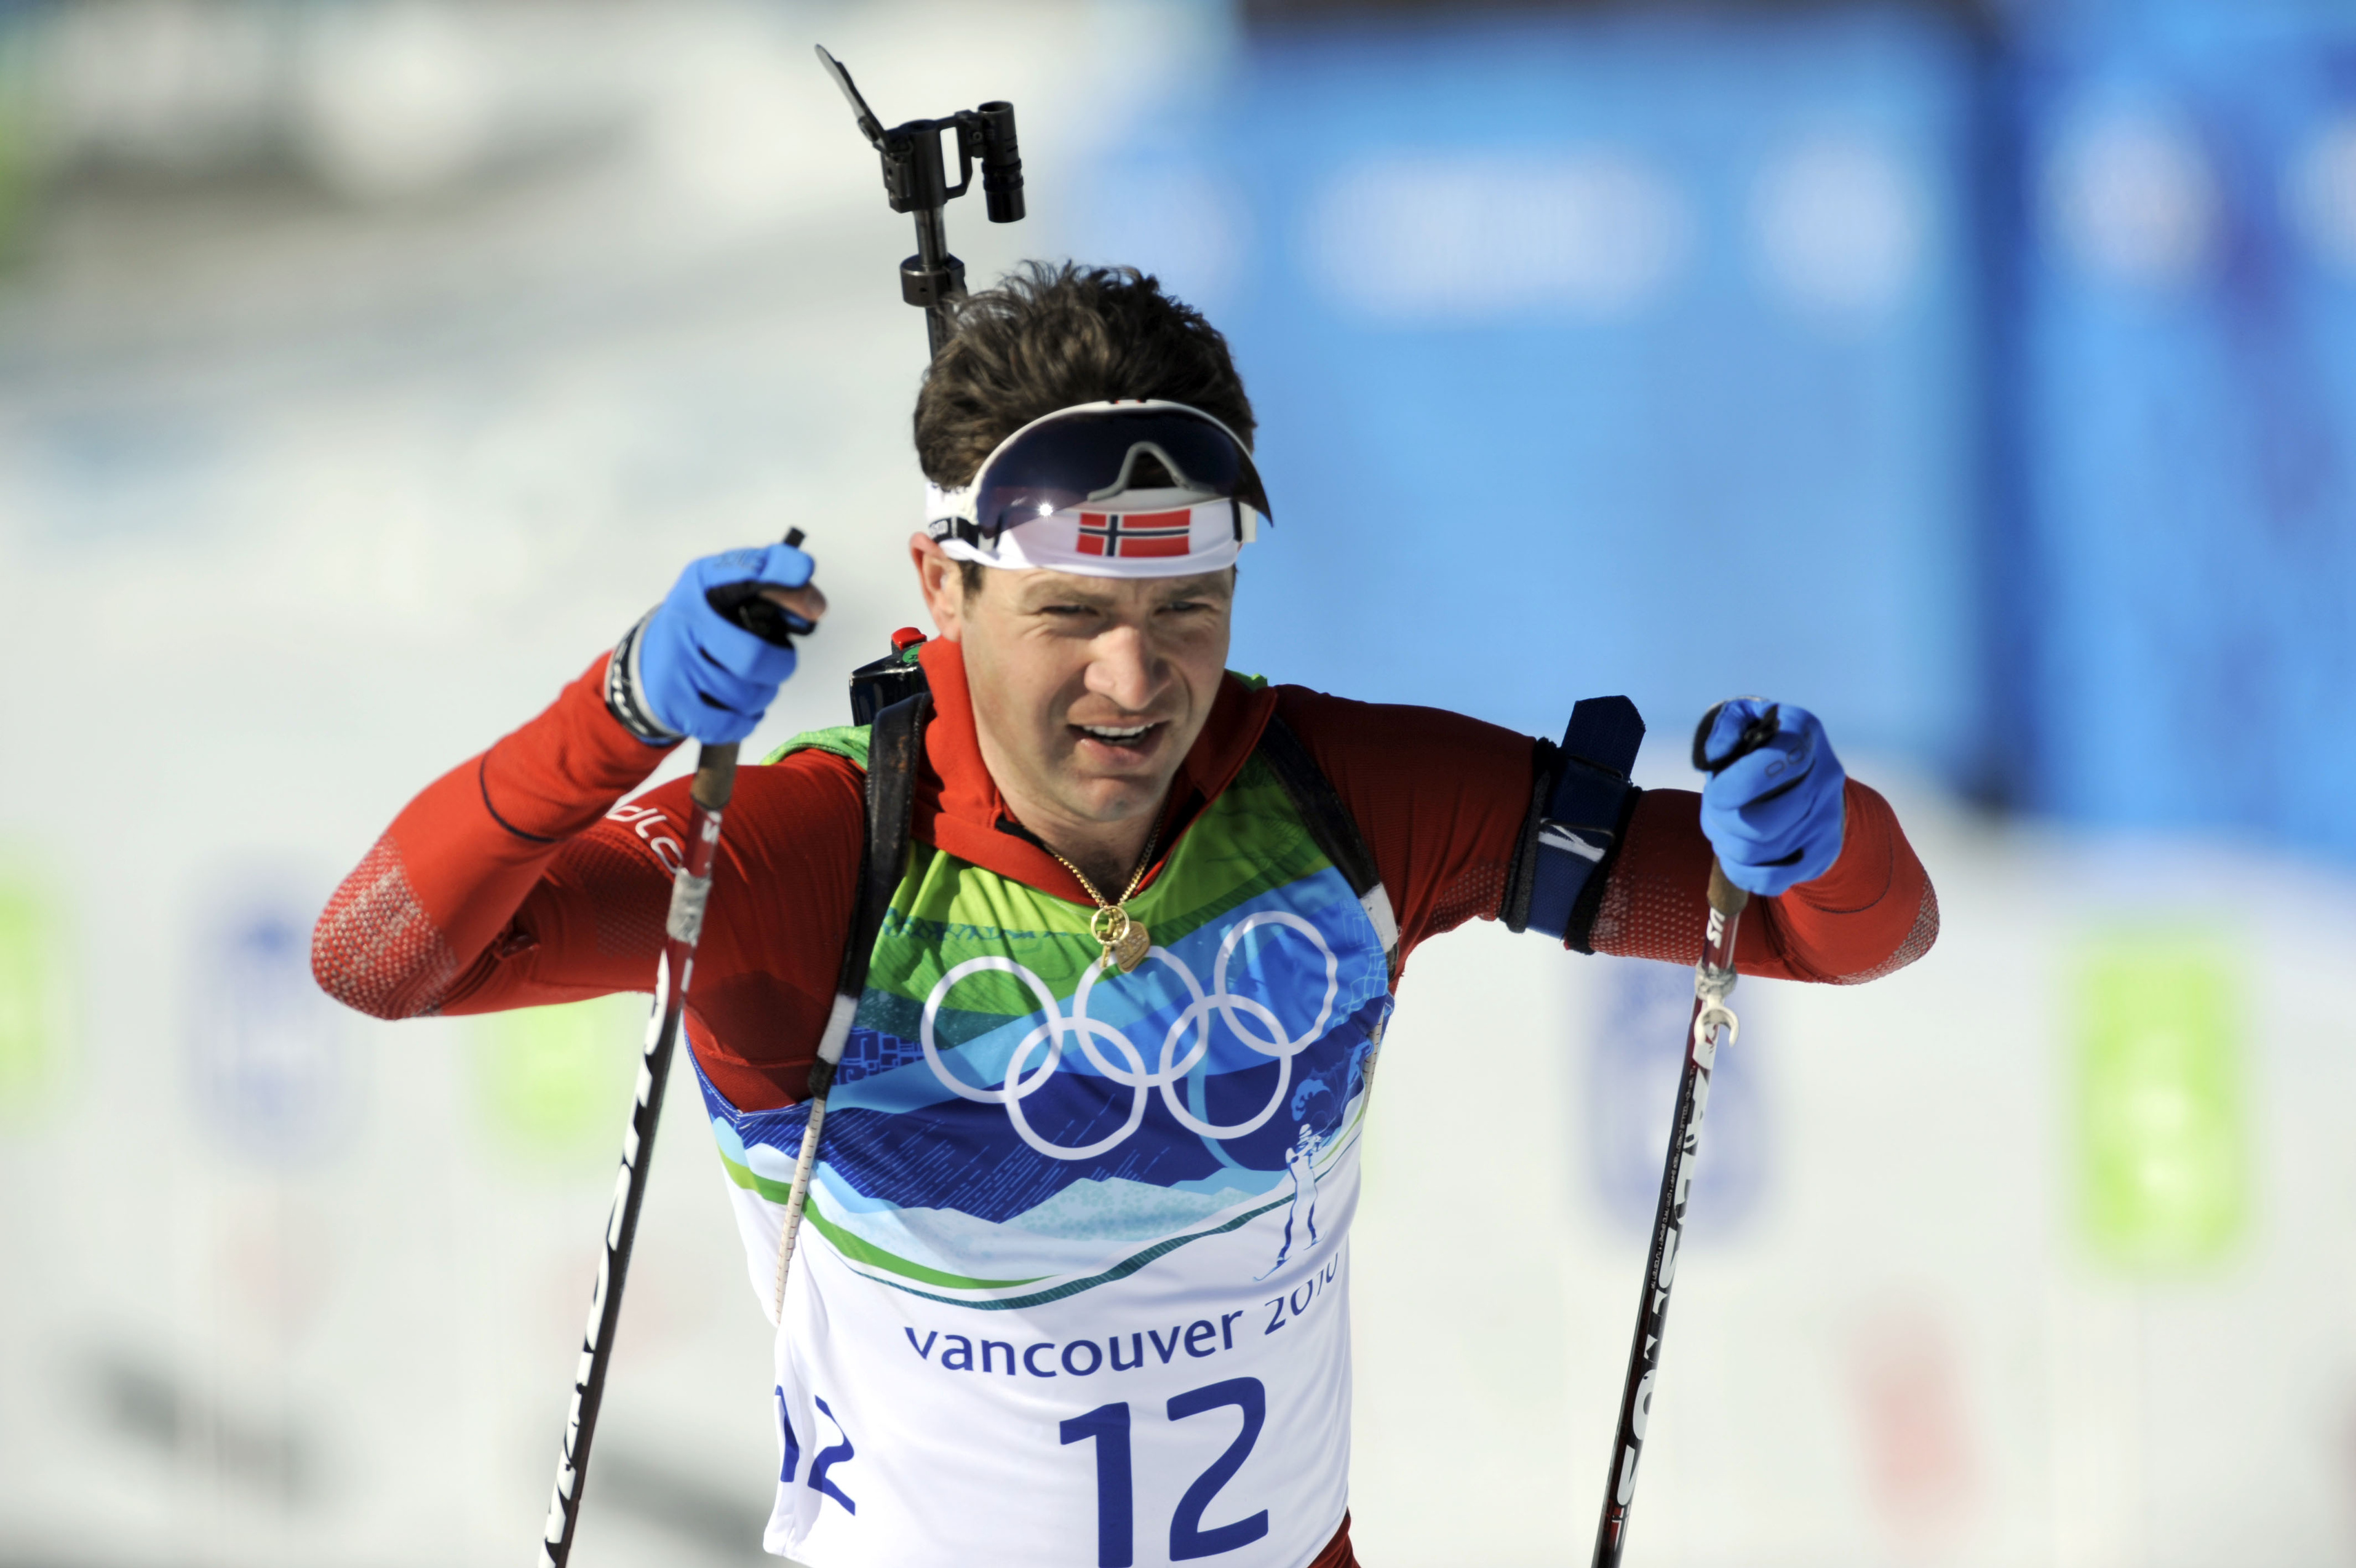 WHISTLER OLYMPIC PARK, CANADA - FEBRUARY 18: (FRANCE OUT) Ole Einar Bjoerndalen of Norway skis enroute to a tie for the silver medal during the Men's Biathlon 20km Individual on Day 7 of the 2010 Vancouver Winter Olympic Games on February 18, 2010 in Whistler Olympic Park, Canada. (Photo by Philippe/Montigny/Agence/Zoom/Getty Images)